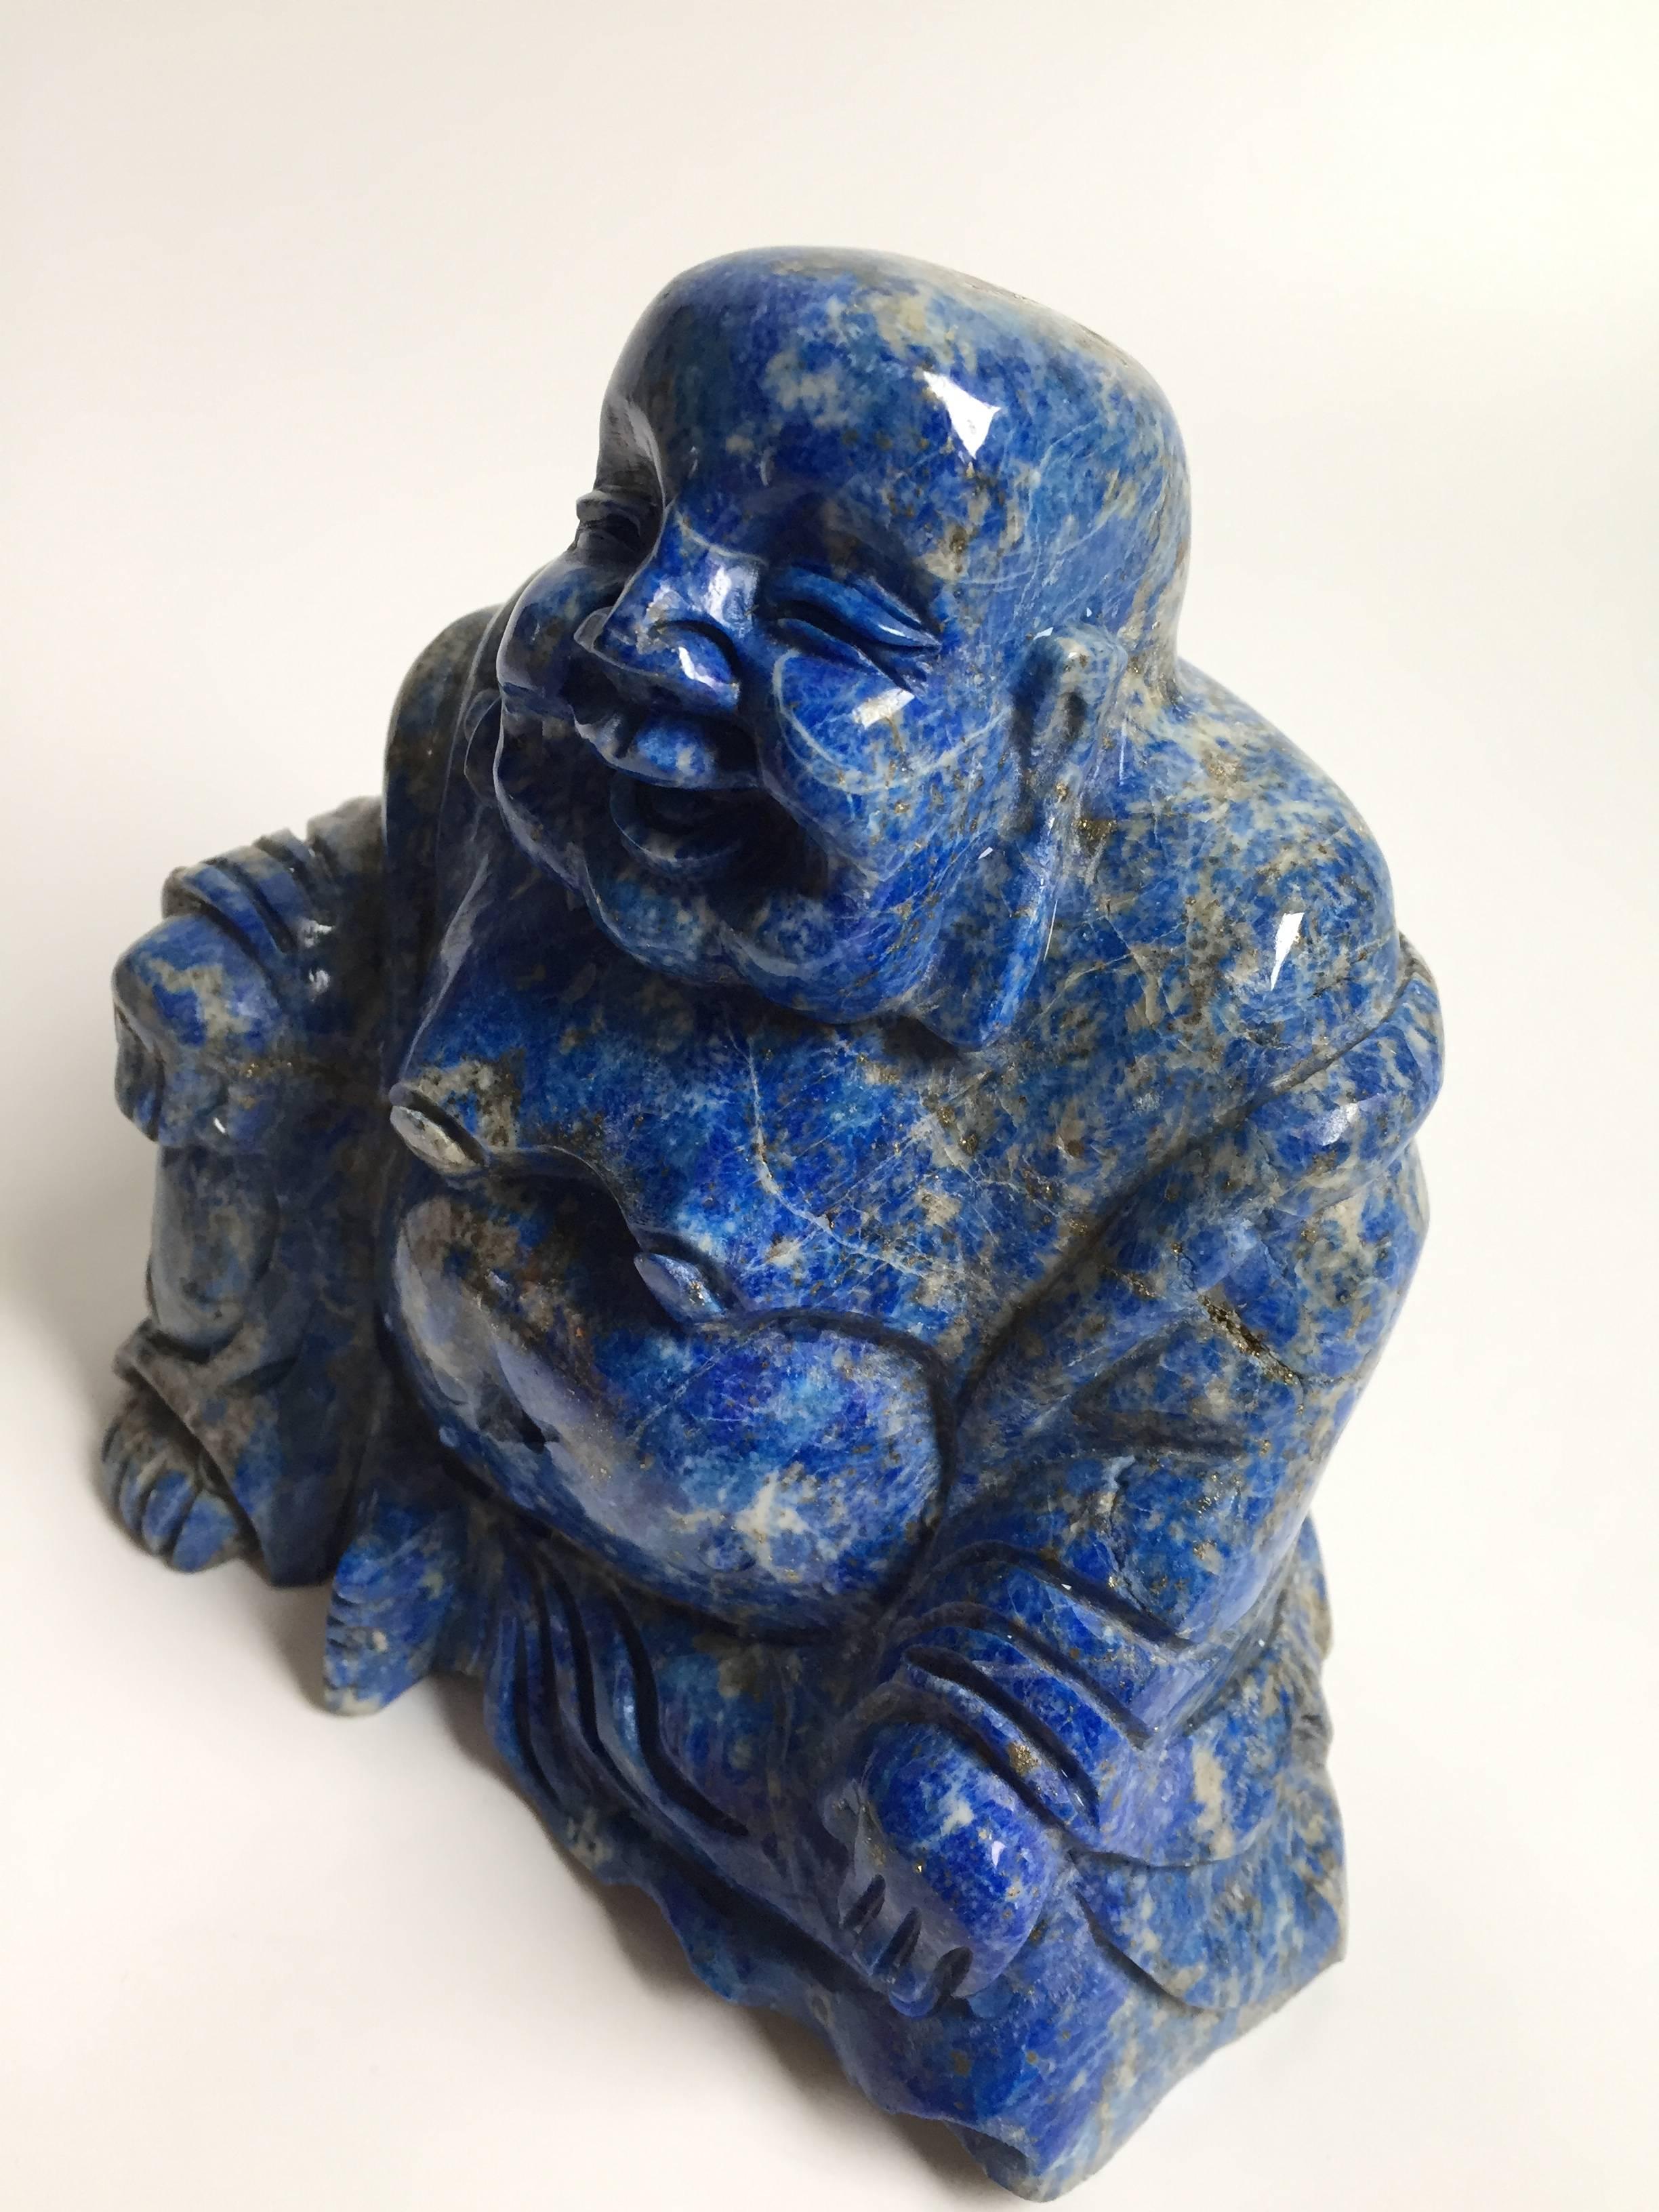 The gem stone that is used in this sculpture is a fine example of all natural Lapis Lazuli. Its vivid blue color laced with sparkling gold is a true beauty. 

Happy Buddha brings happiness and joy. 

All natural. Hand-carved. 

3.4 lb (1675